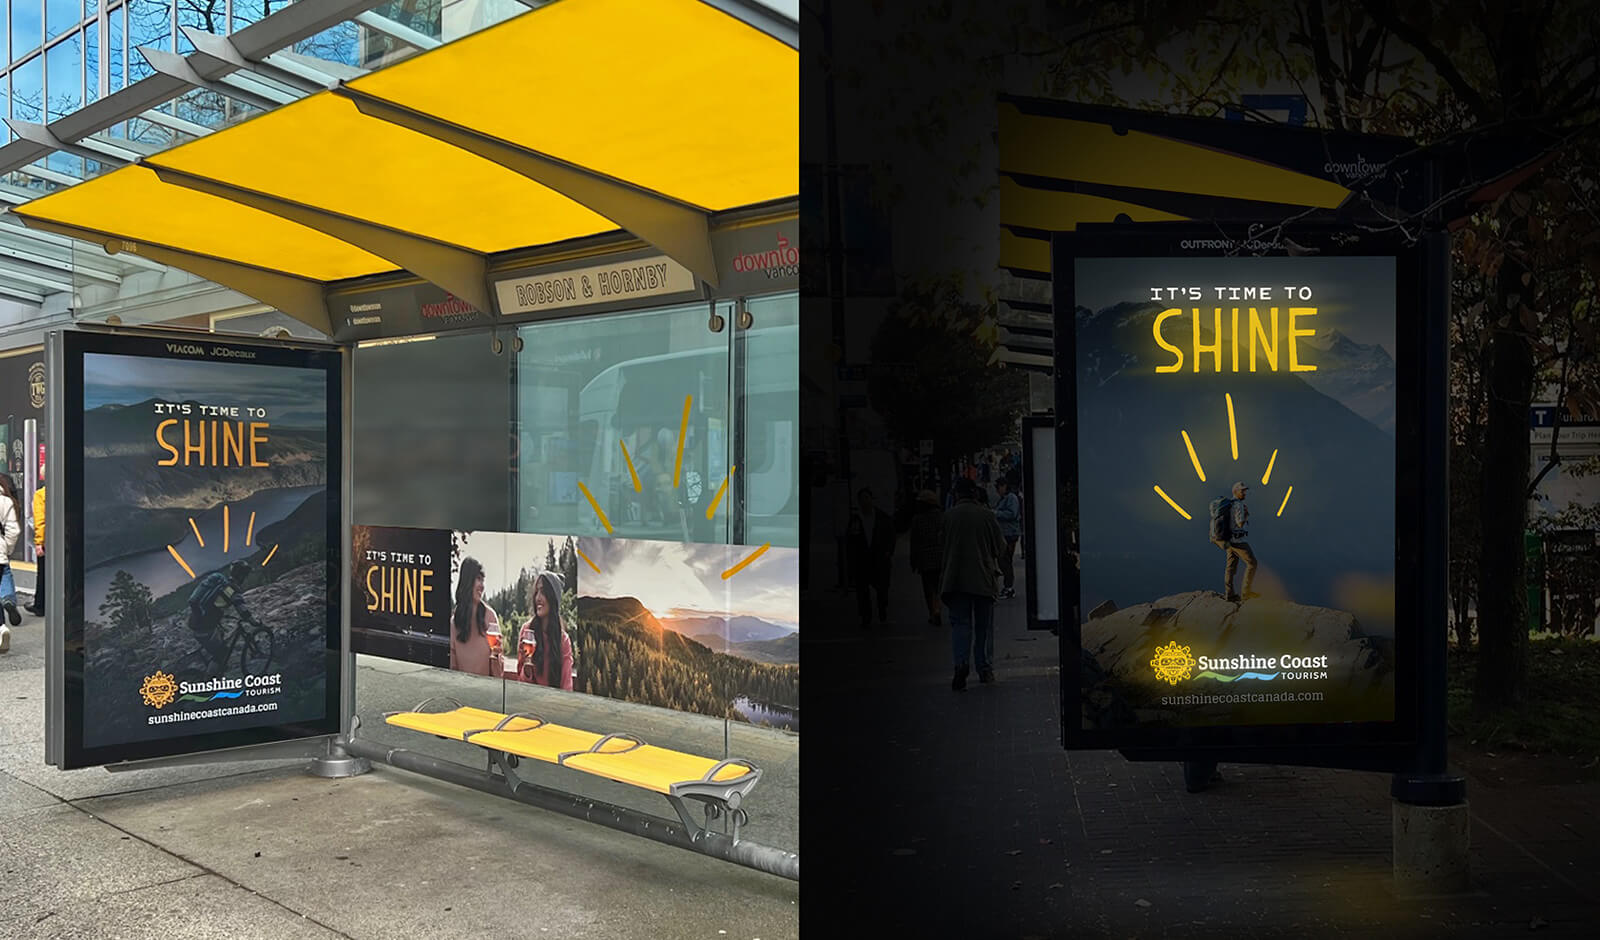 Motion-activated Transit Shelter